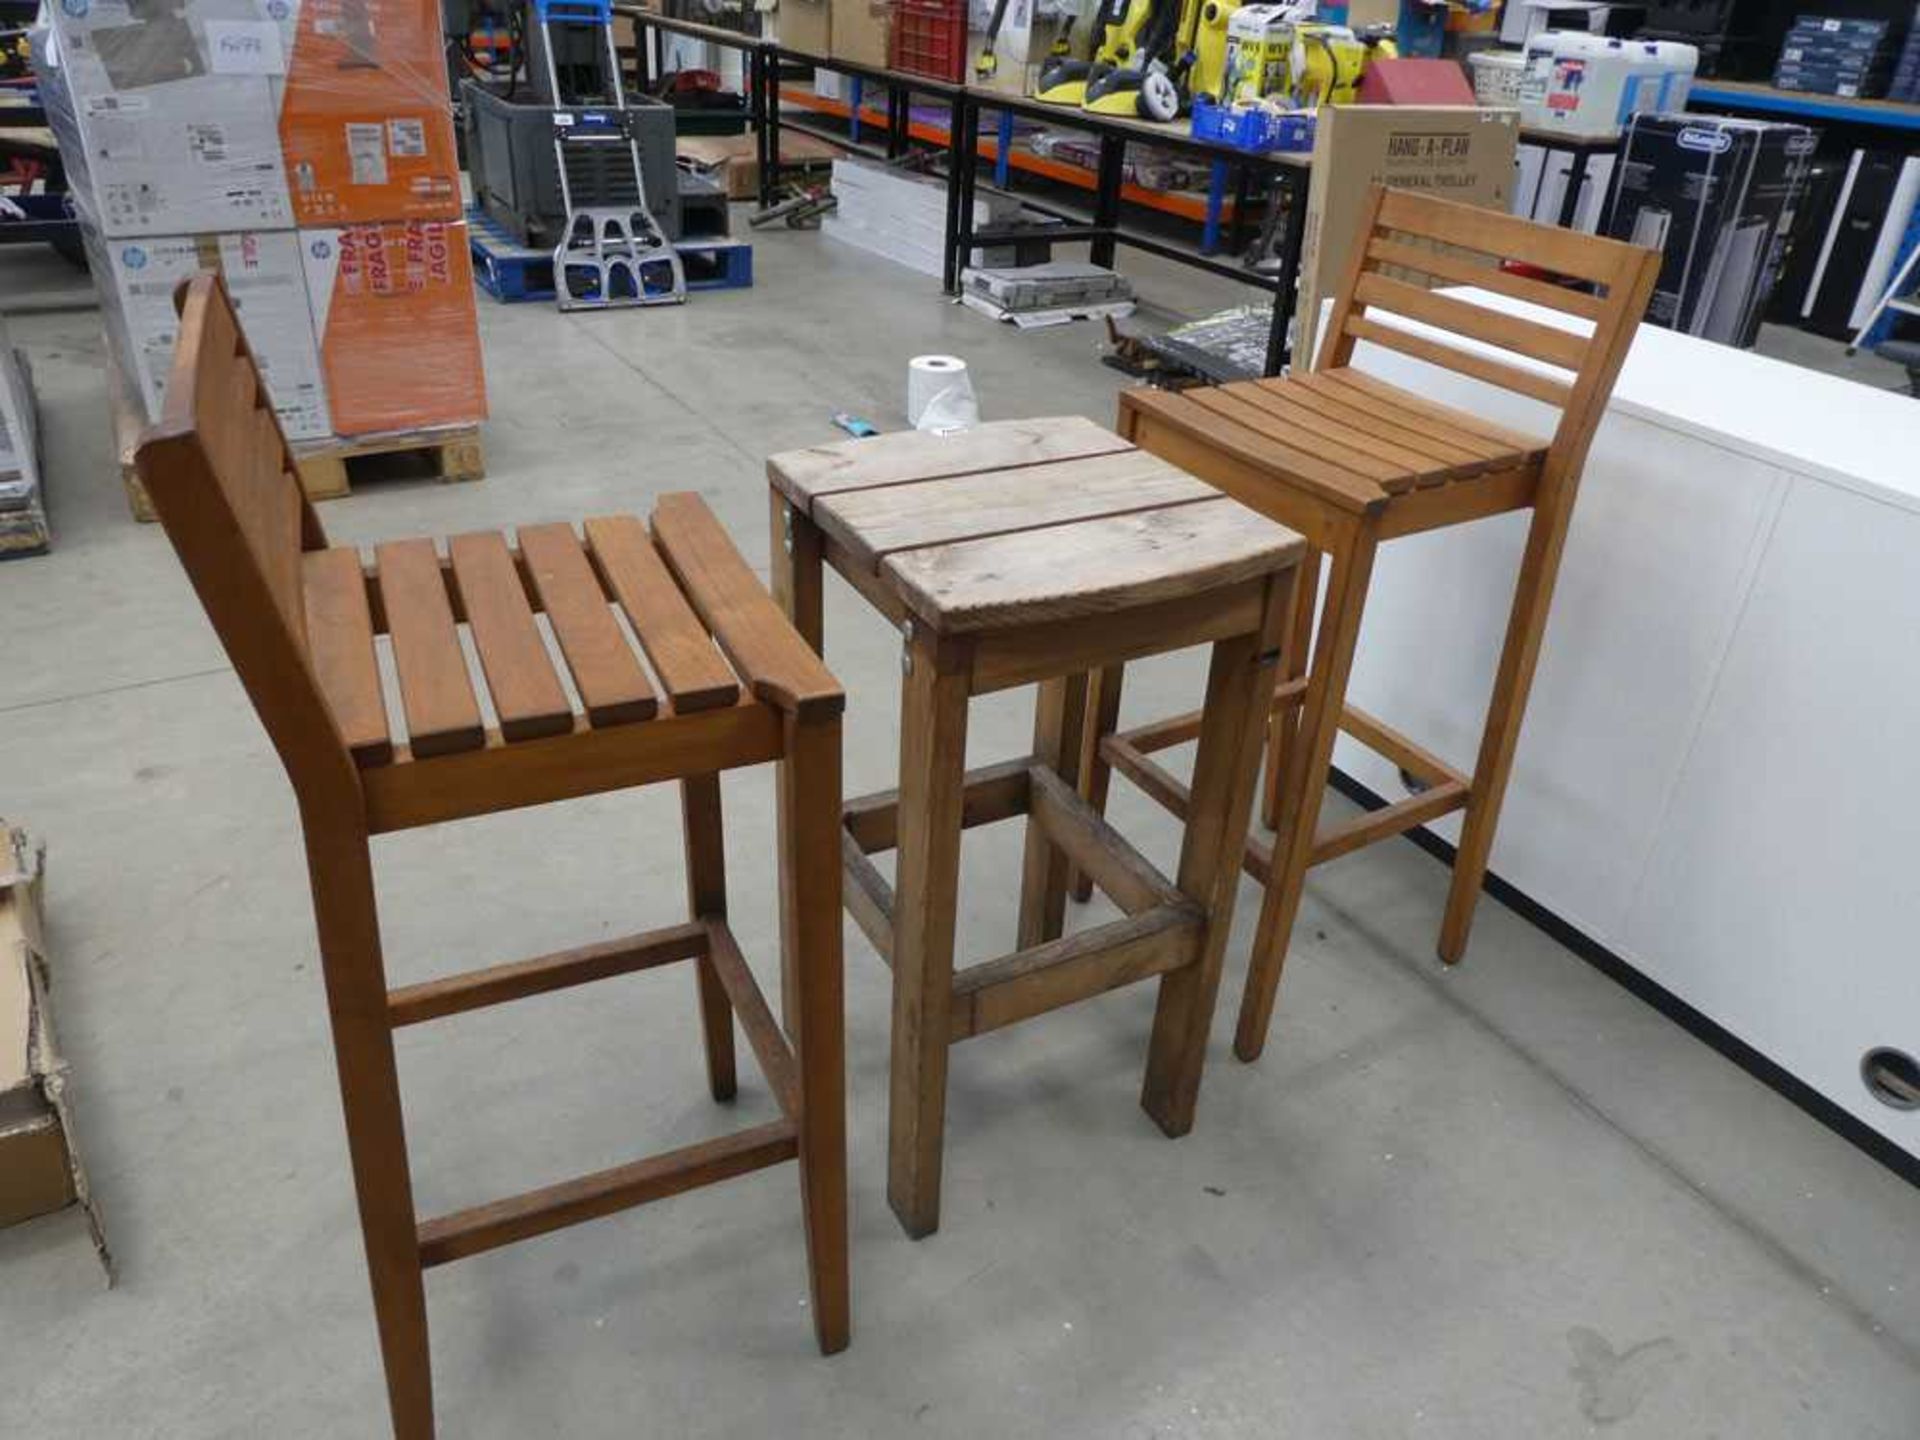 2 high stools and small low table